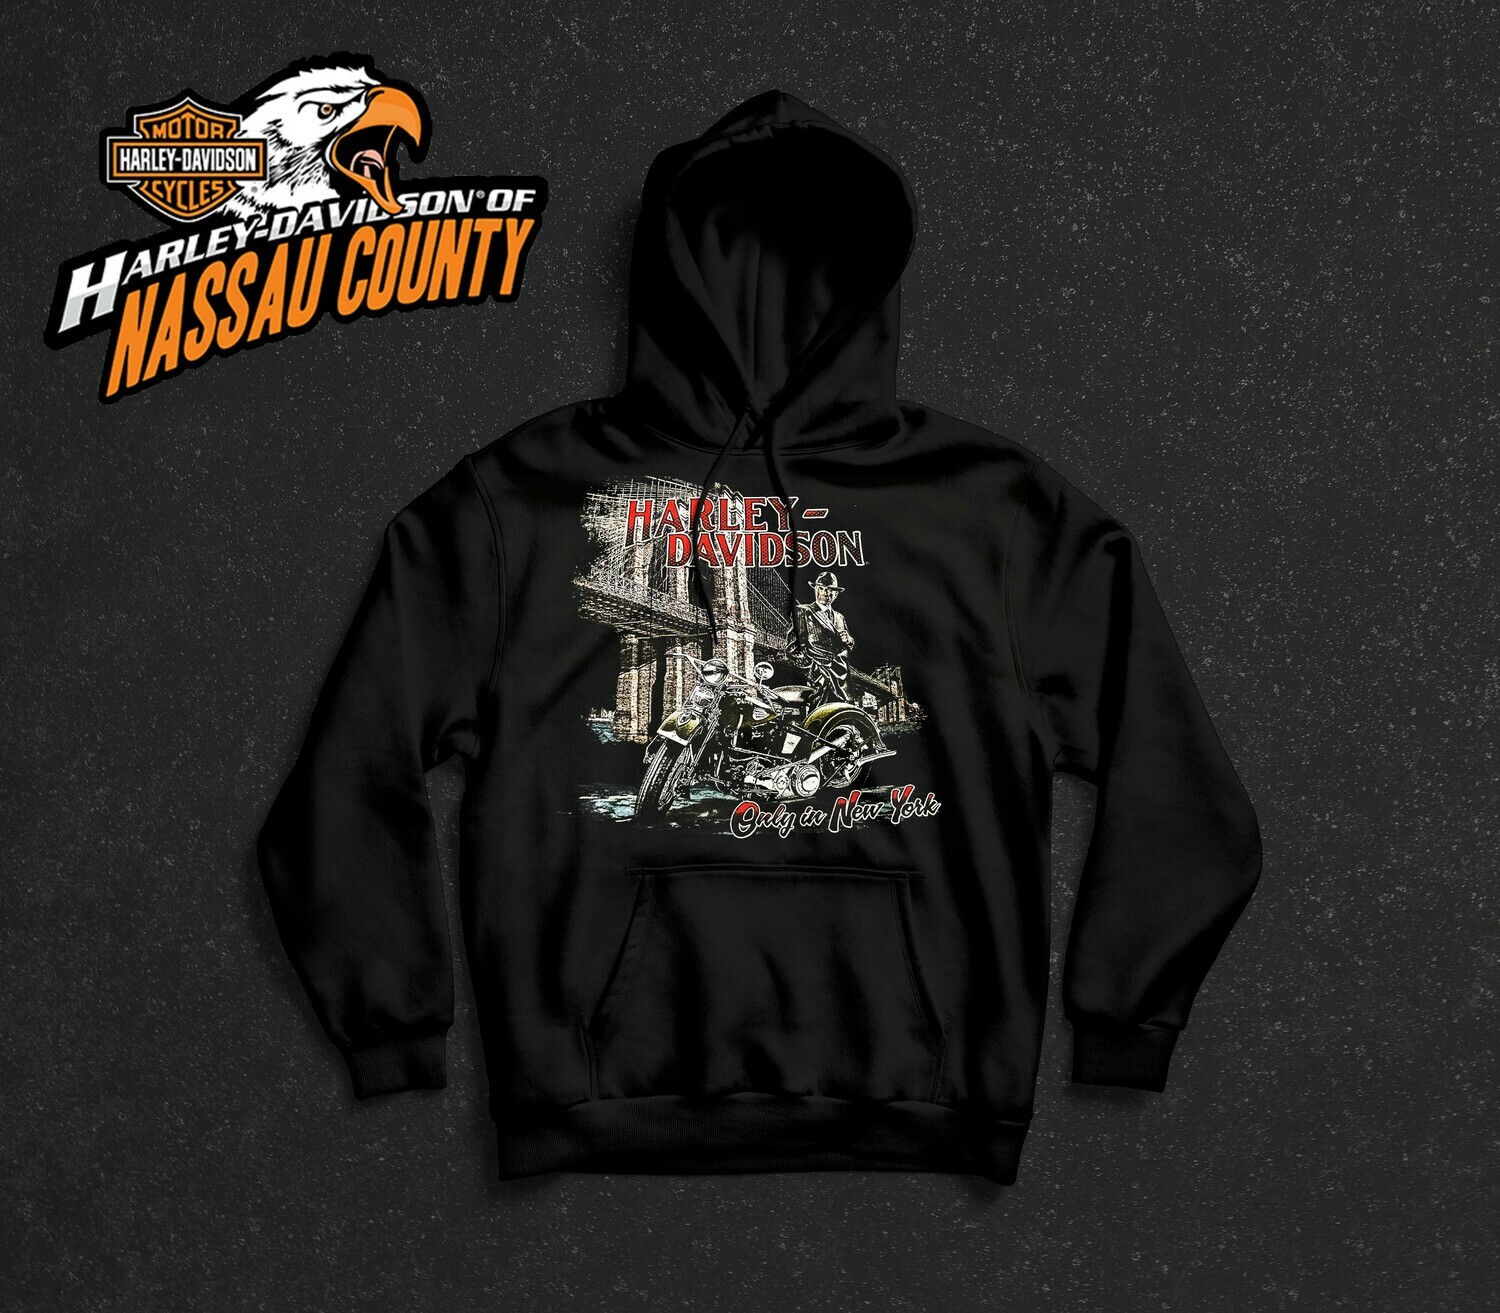 HDNC 'Only In New York" Hoodie